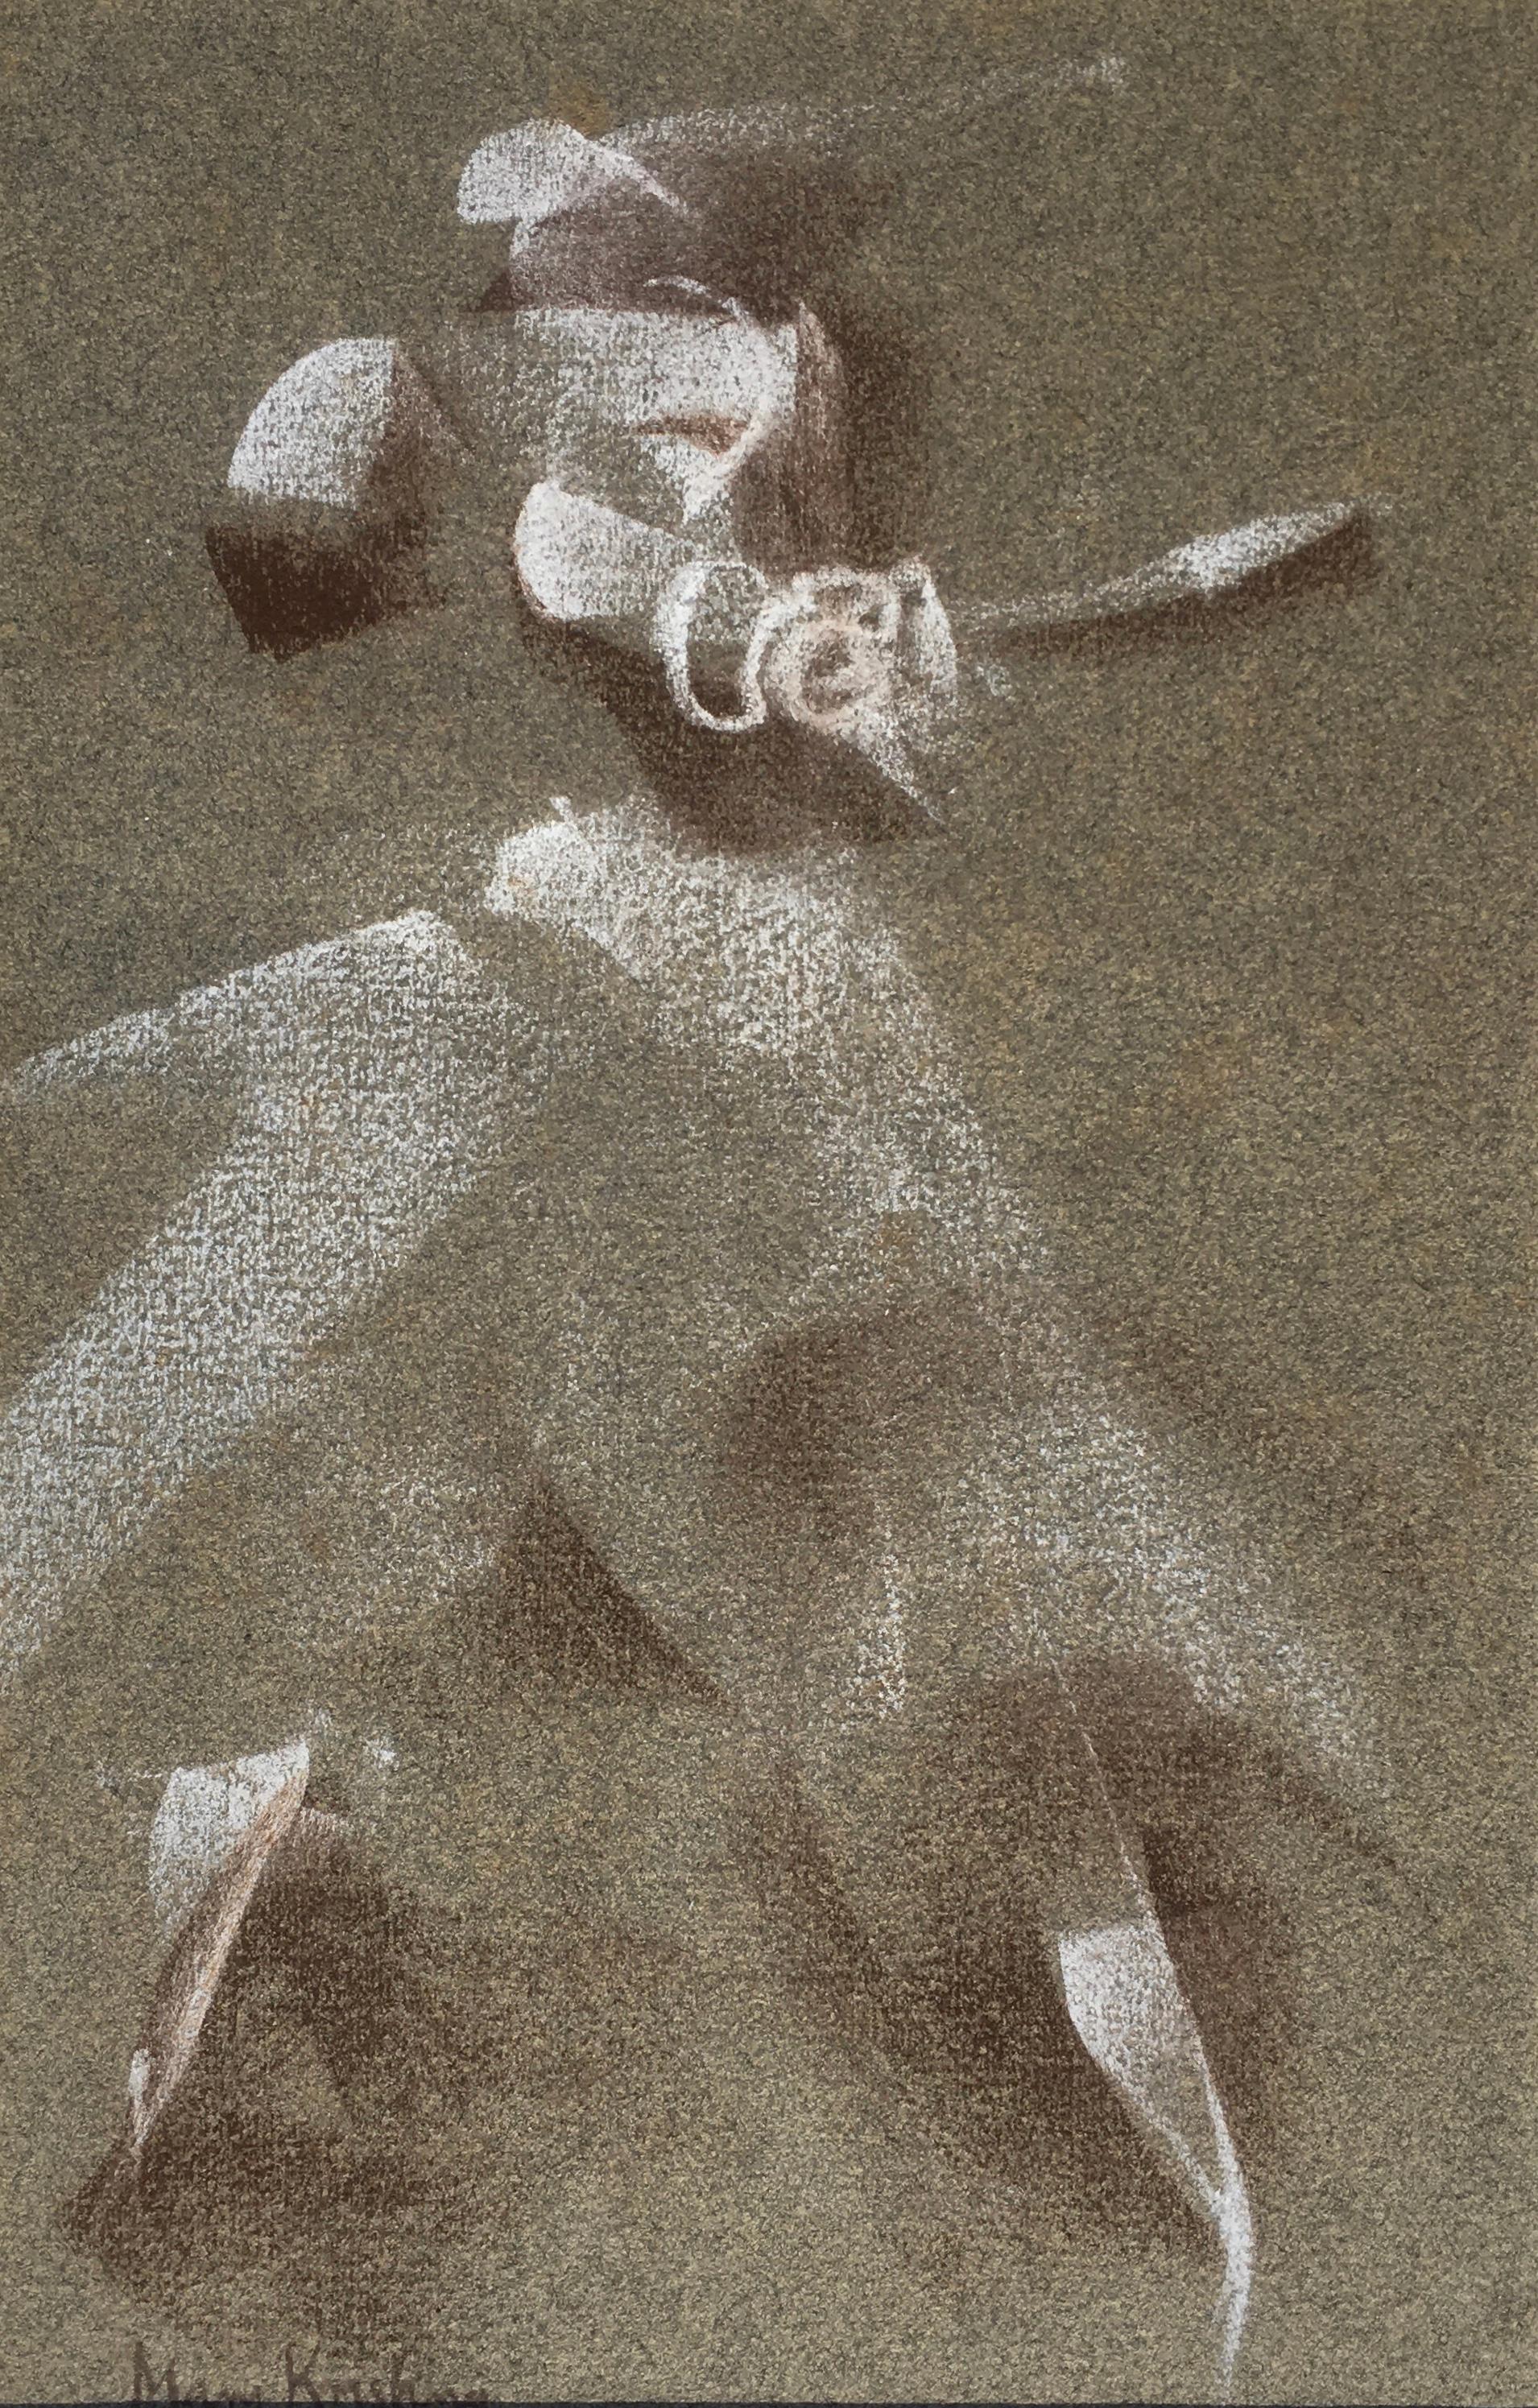 Dancer - 20th Century British/Indian abstract drawing by Mary Krishna